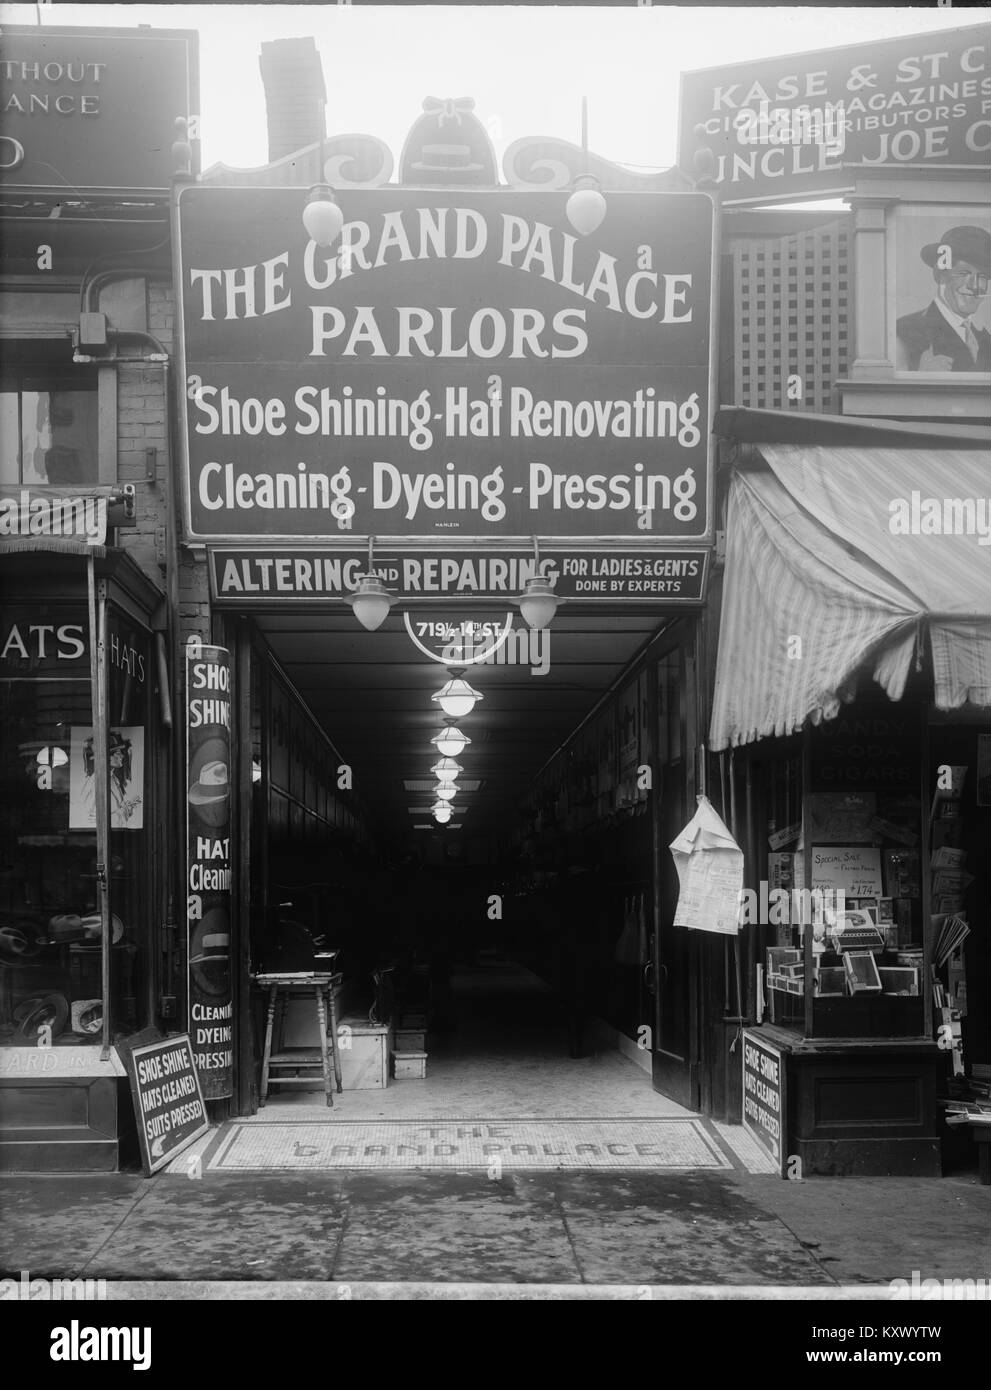 Grand Palace Shoe Shine, Cleaning, Dying & Pressing;  Hats Blocked Stock Photo